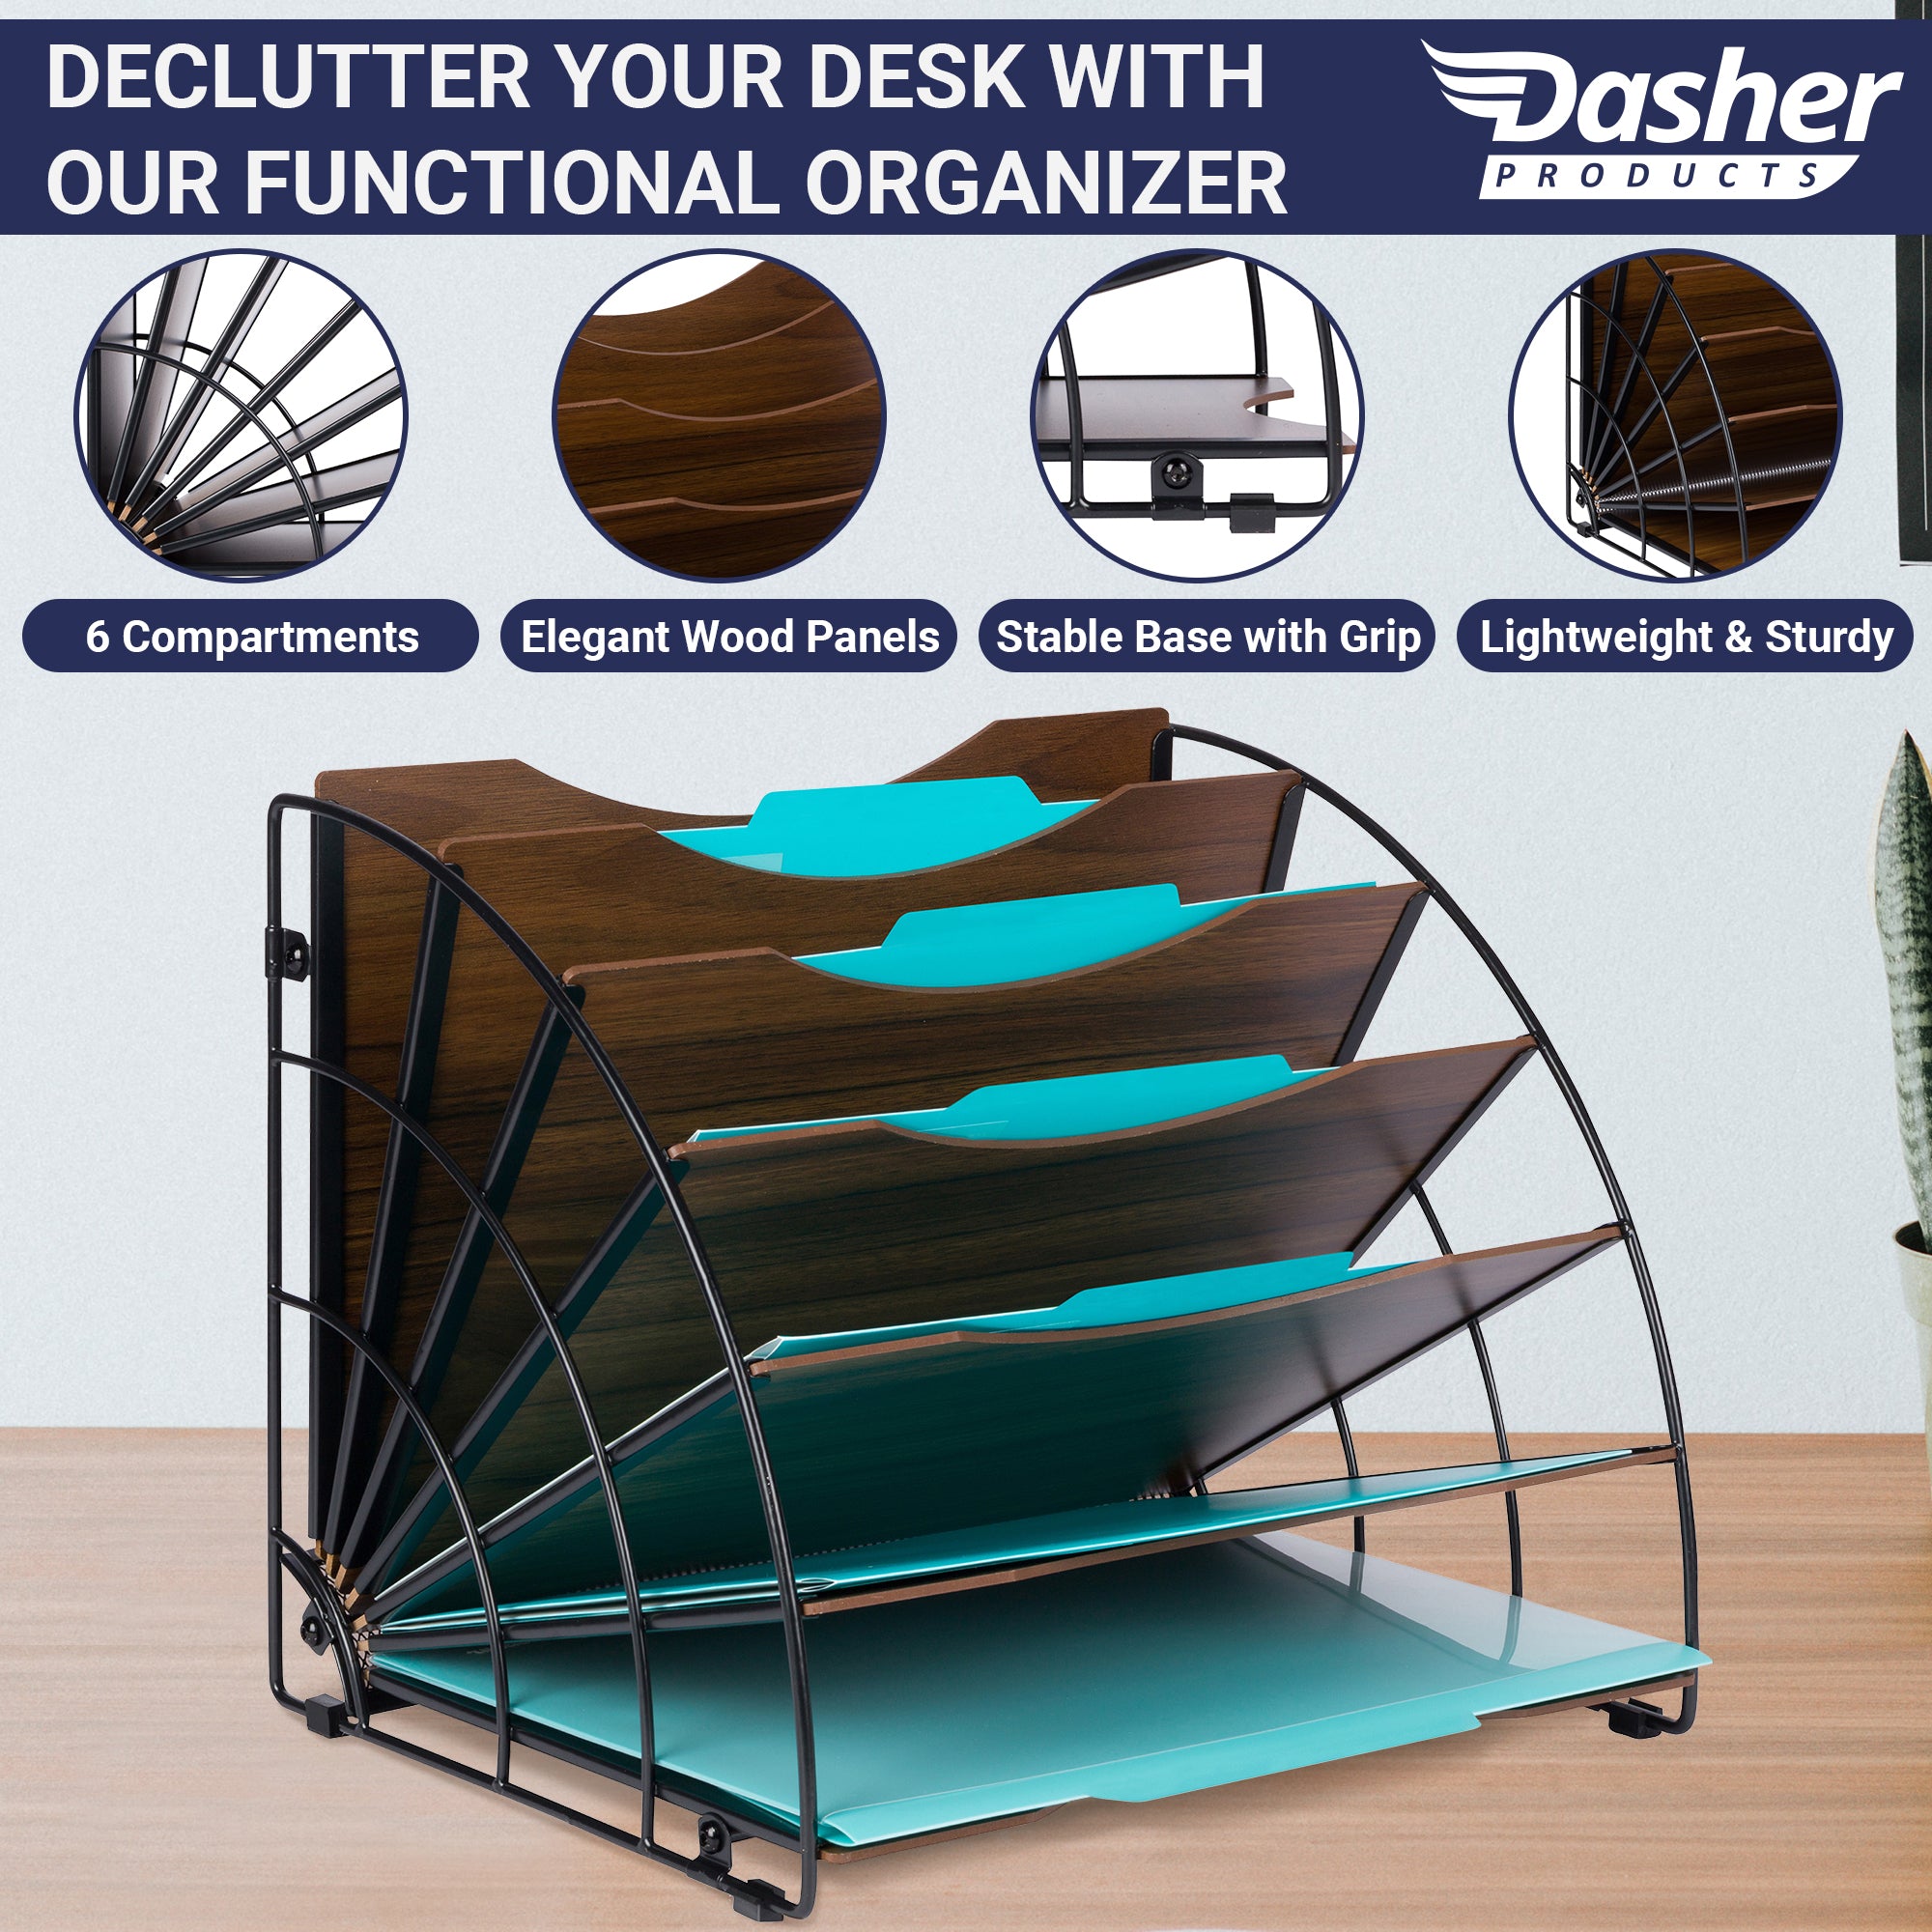 Fan Shaped Office Desk Organisers, 6 Compartments with Wood